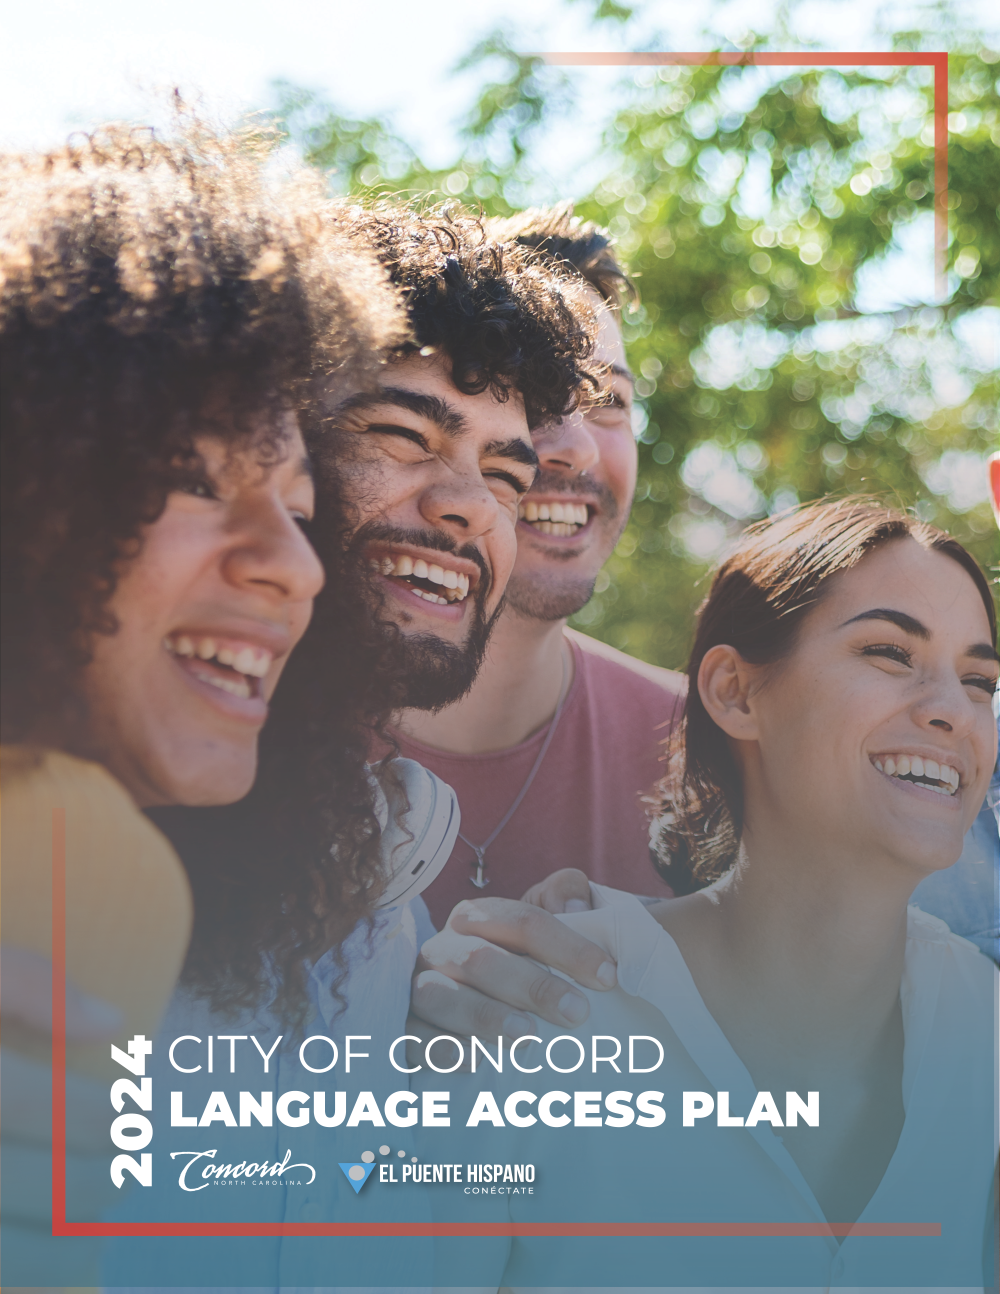 Cover Image of the Language Access Plan document